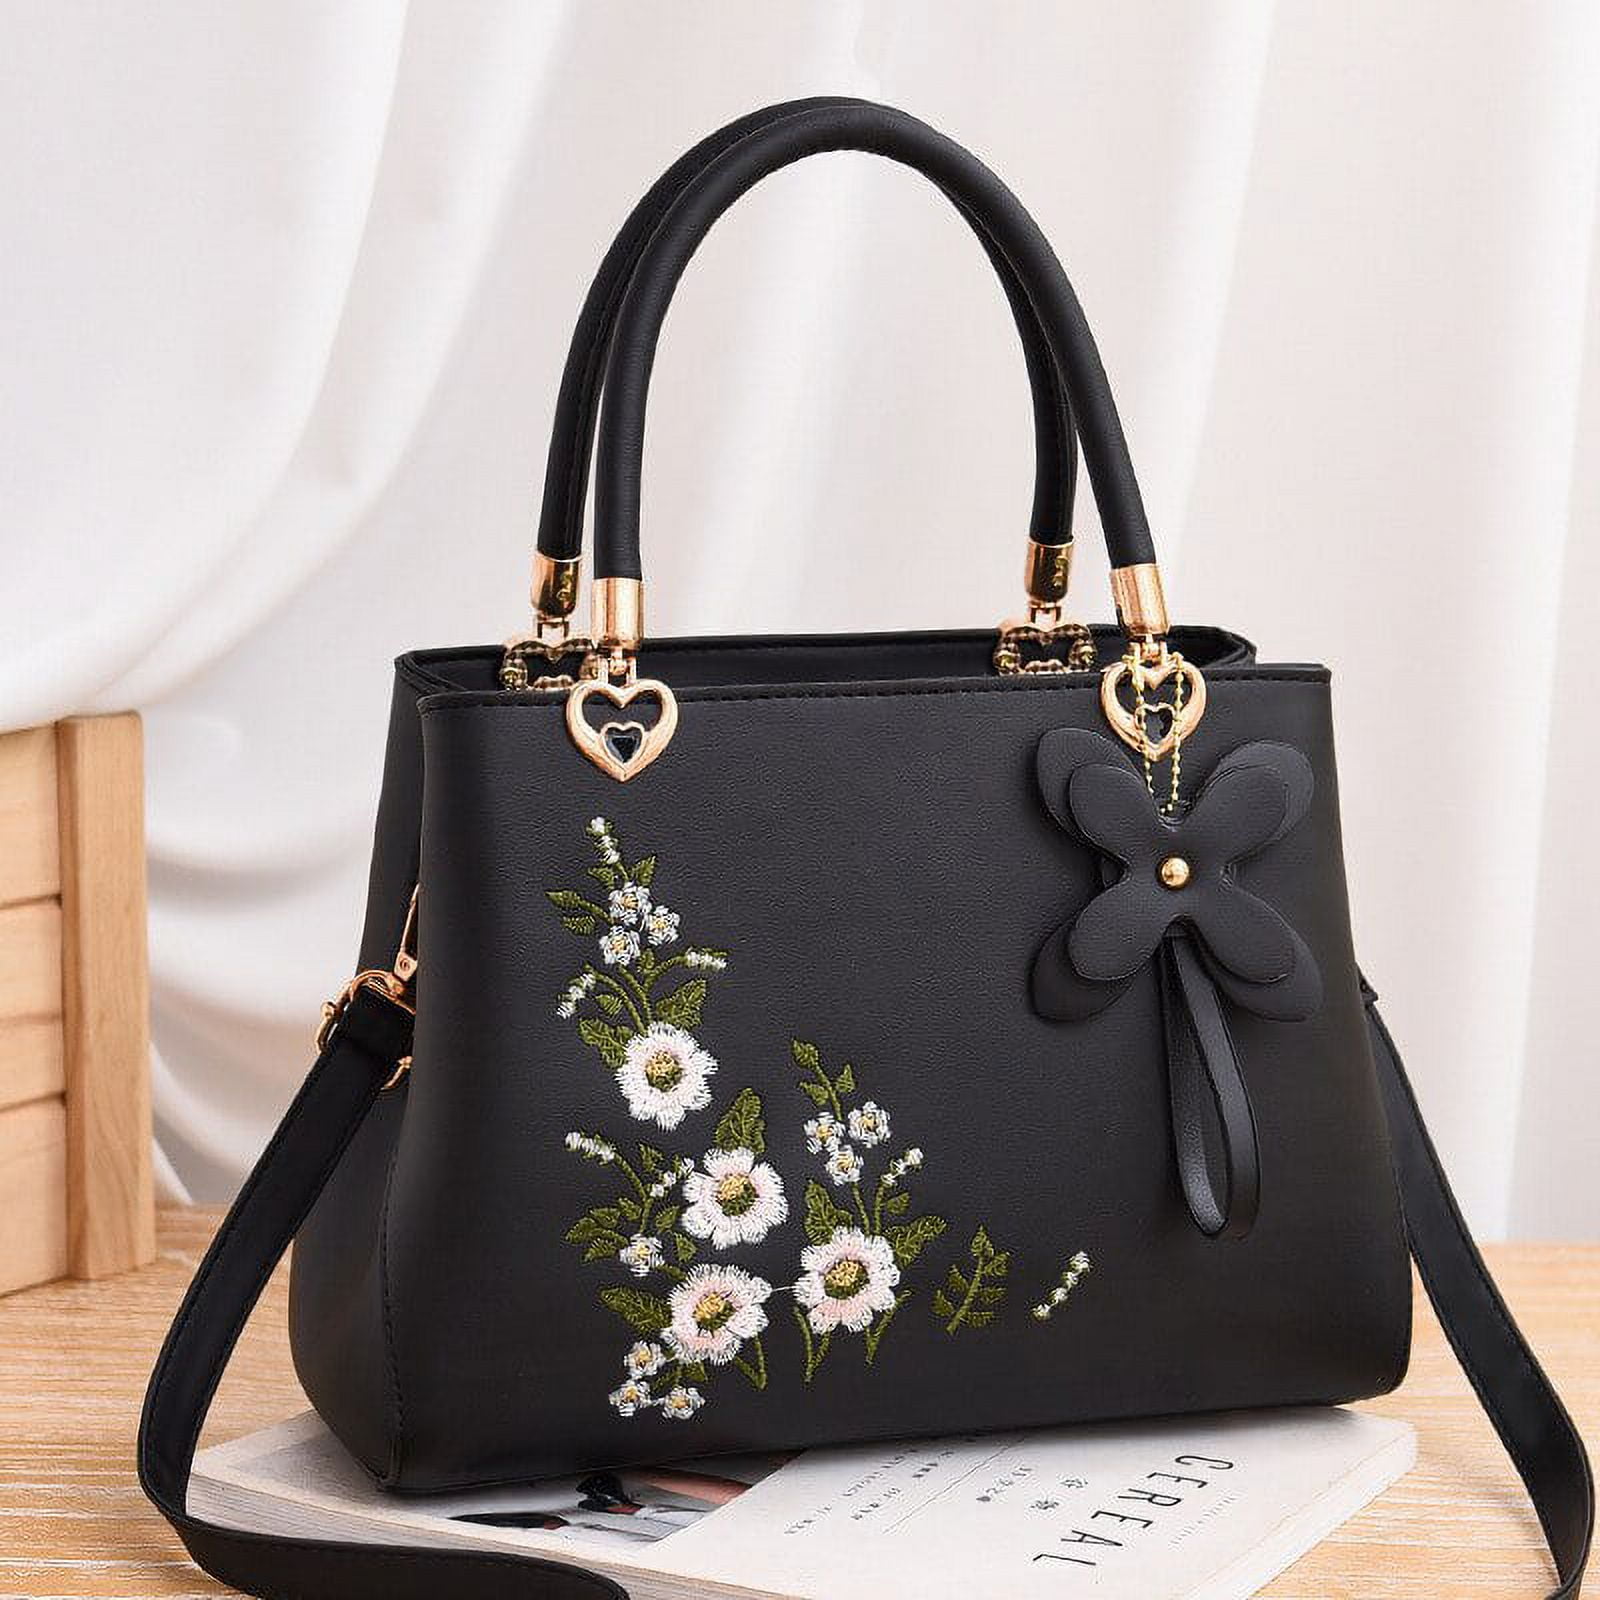 CoCopeaunts new Embroidered Messenger Bags Women Leather Handbags Hand Bags  for Women Sac a Main Ladies Hand Bag Female bag sac femme 